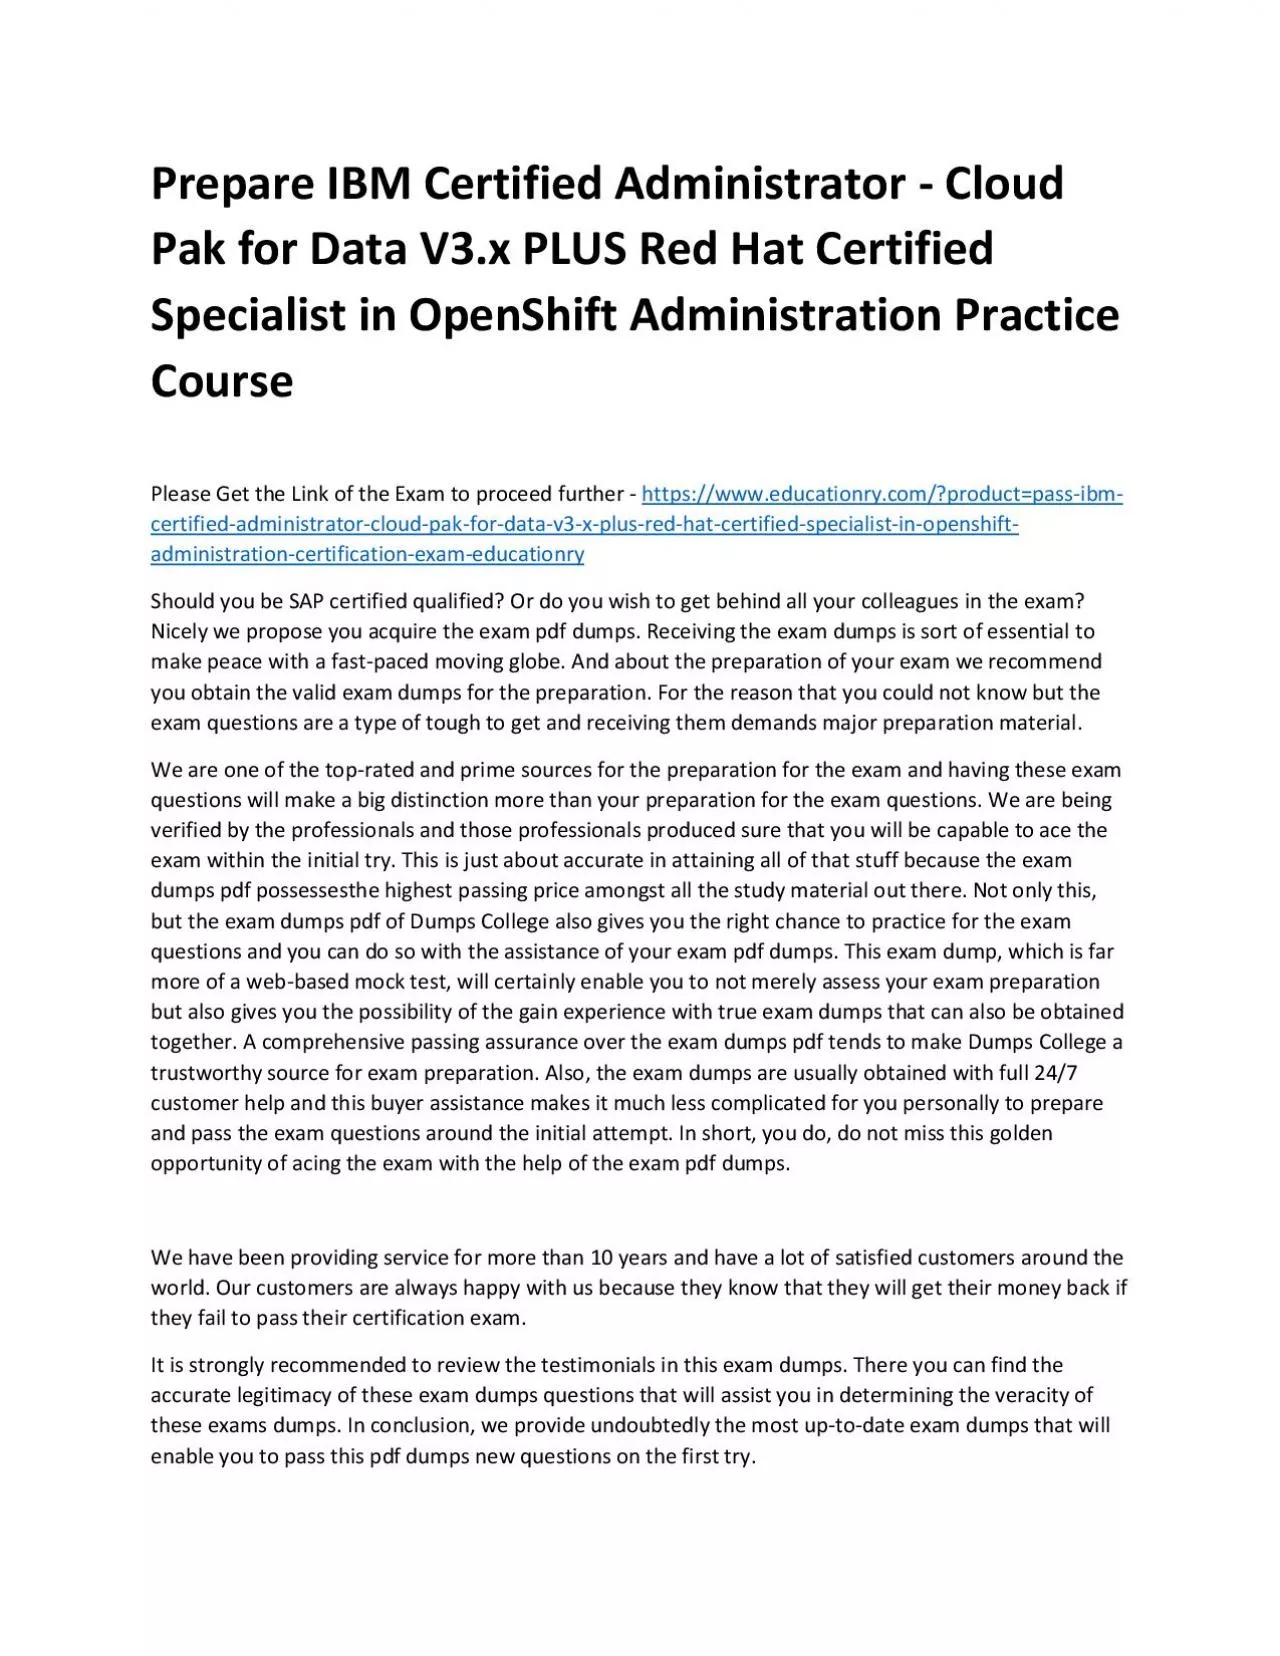 C0007600: IBM Certified Administrator - Cloud Pak for Data V3.x PLUS Red Hat Certified